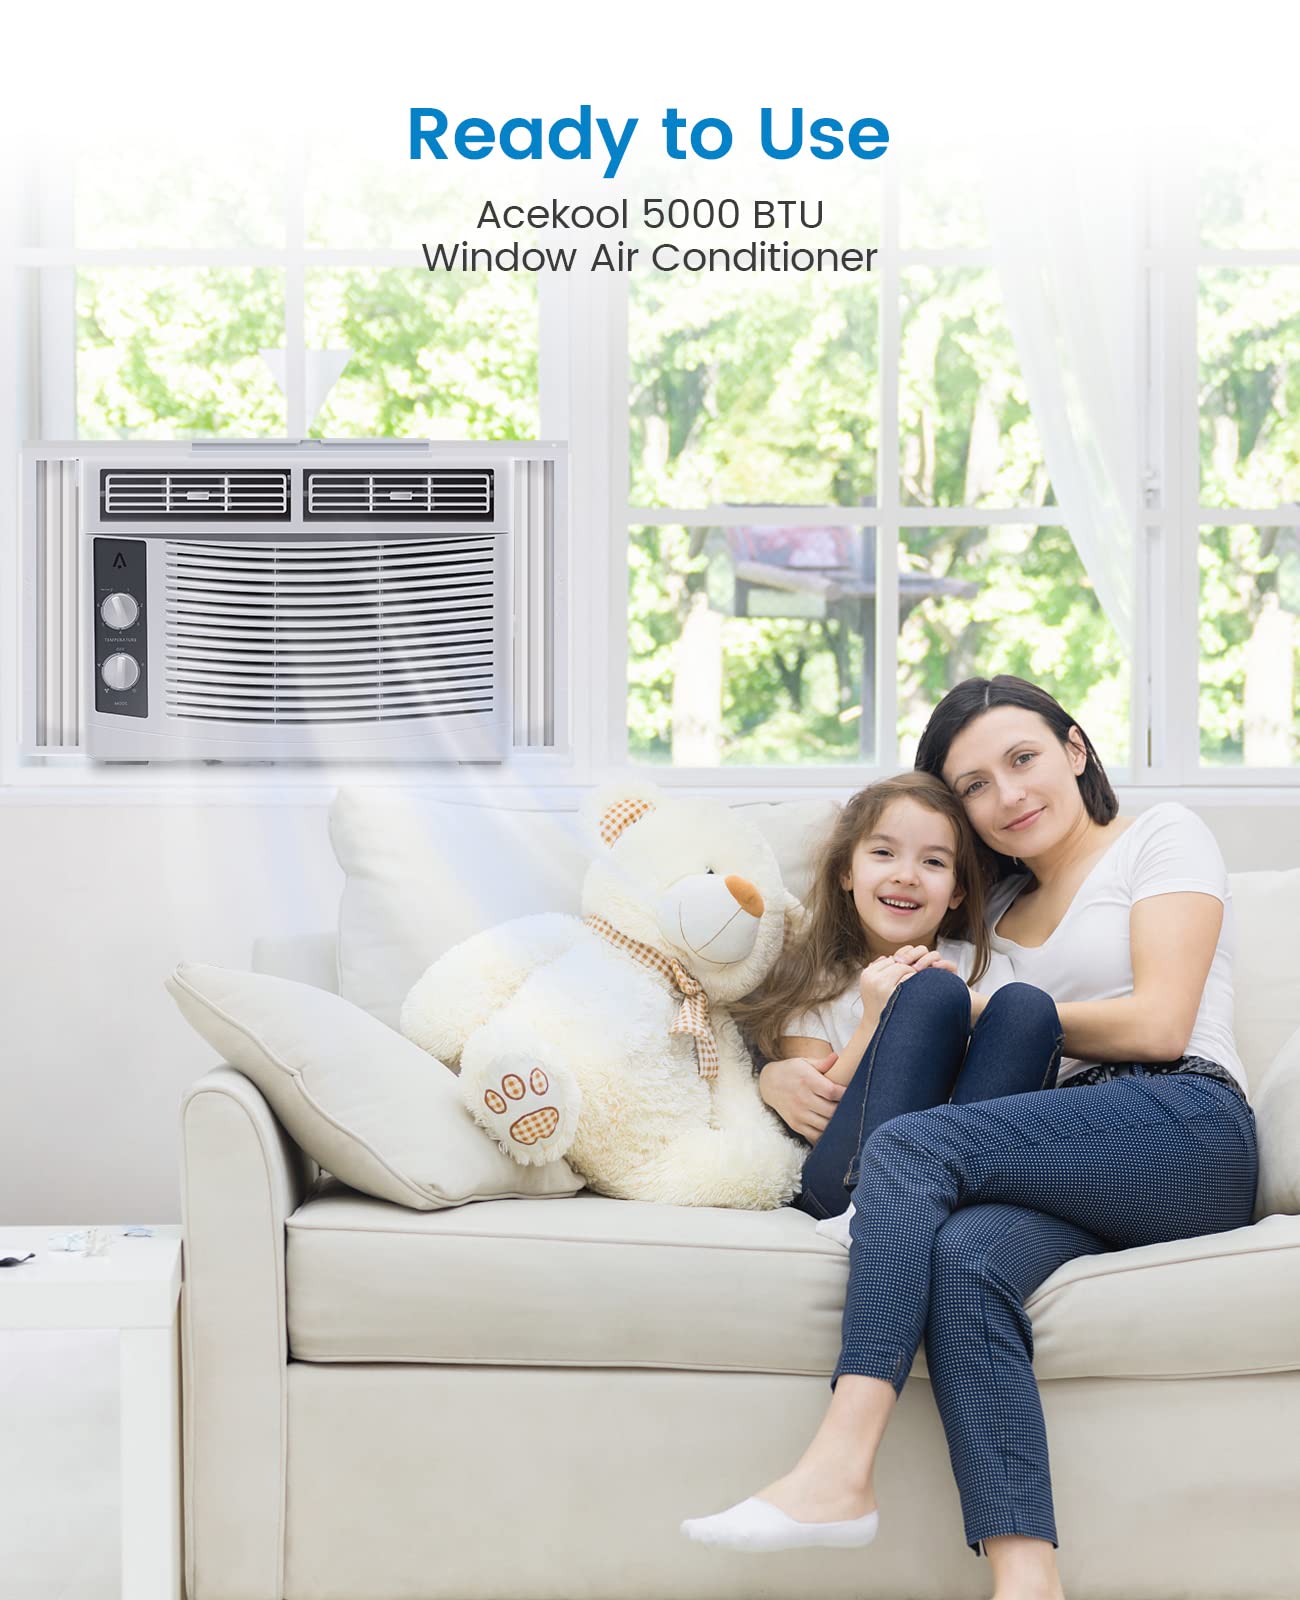 GAOMON 5,000 BTU Window Mounted Air Conditioner - Efficient Cooling Small Window AC Units with Easy-to-Use Mechanical Controls and Washable Filter, Cool up to 150 Sq.Ft., 110-115V